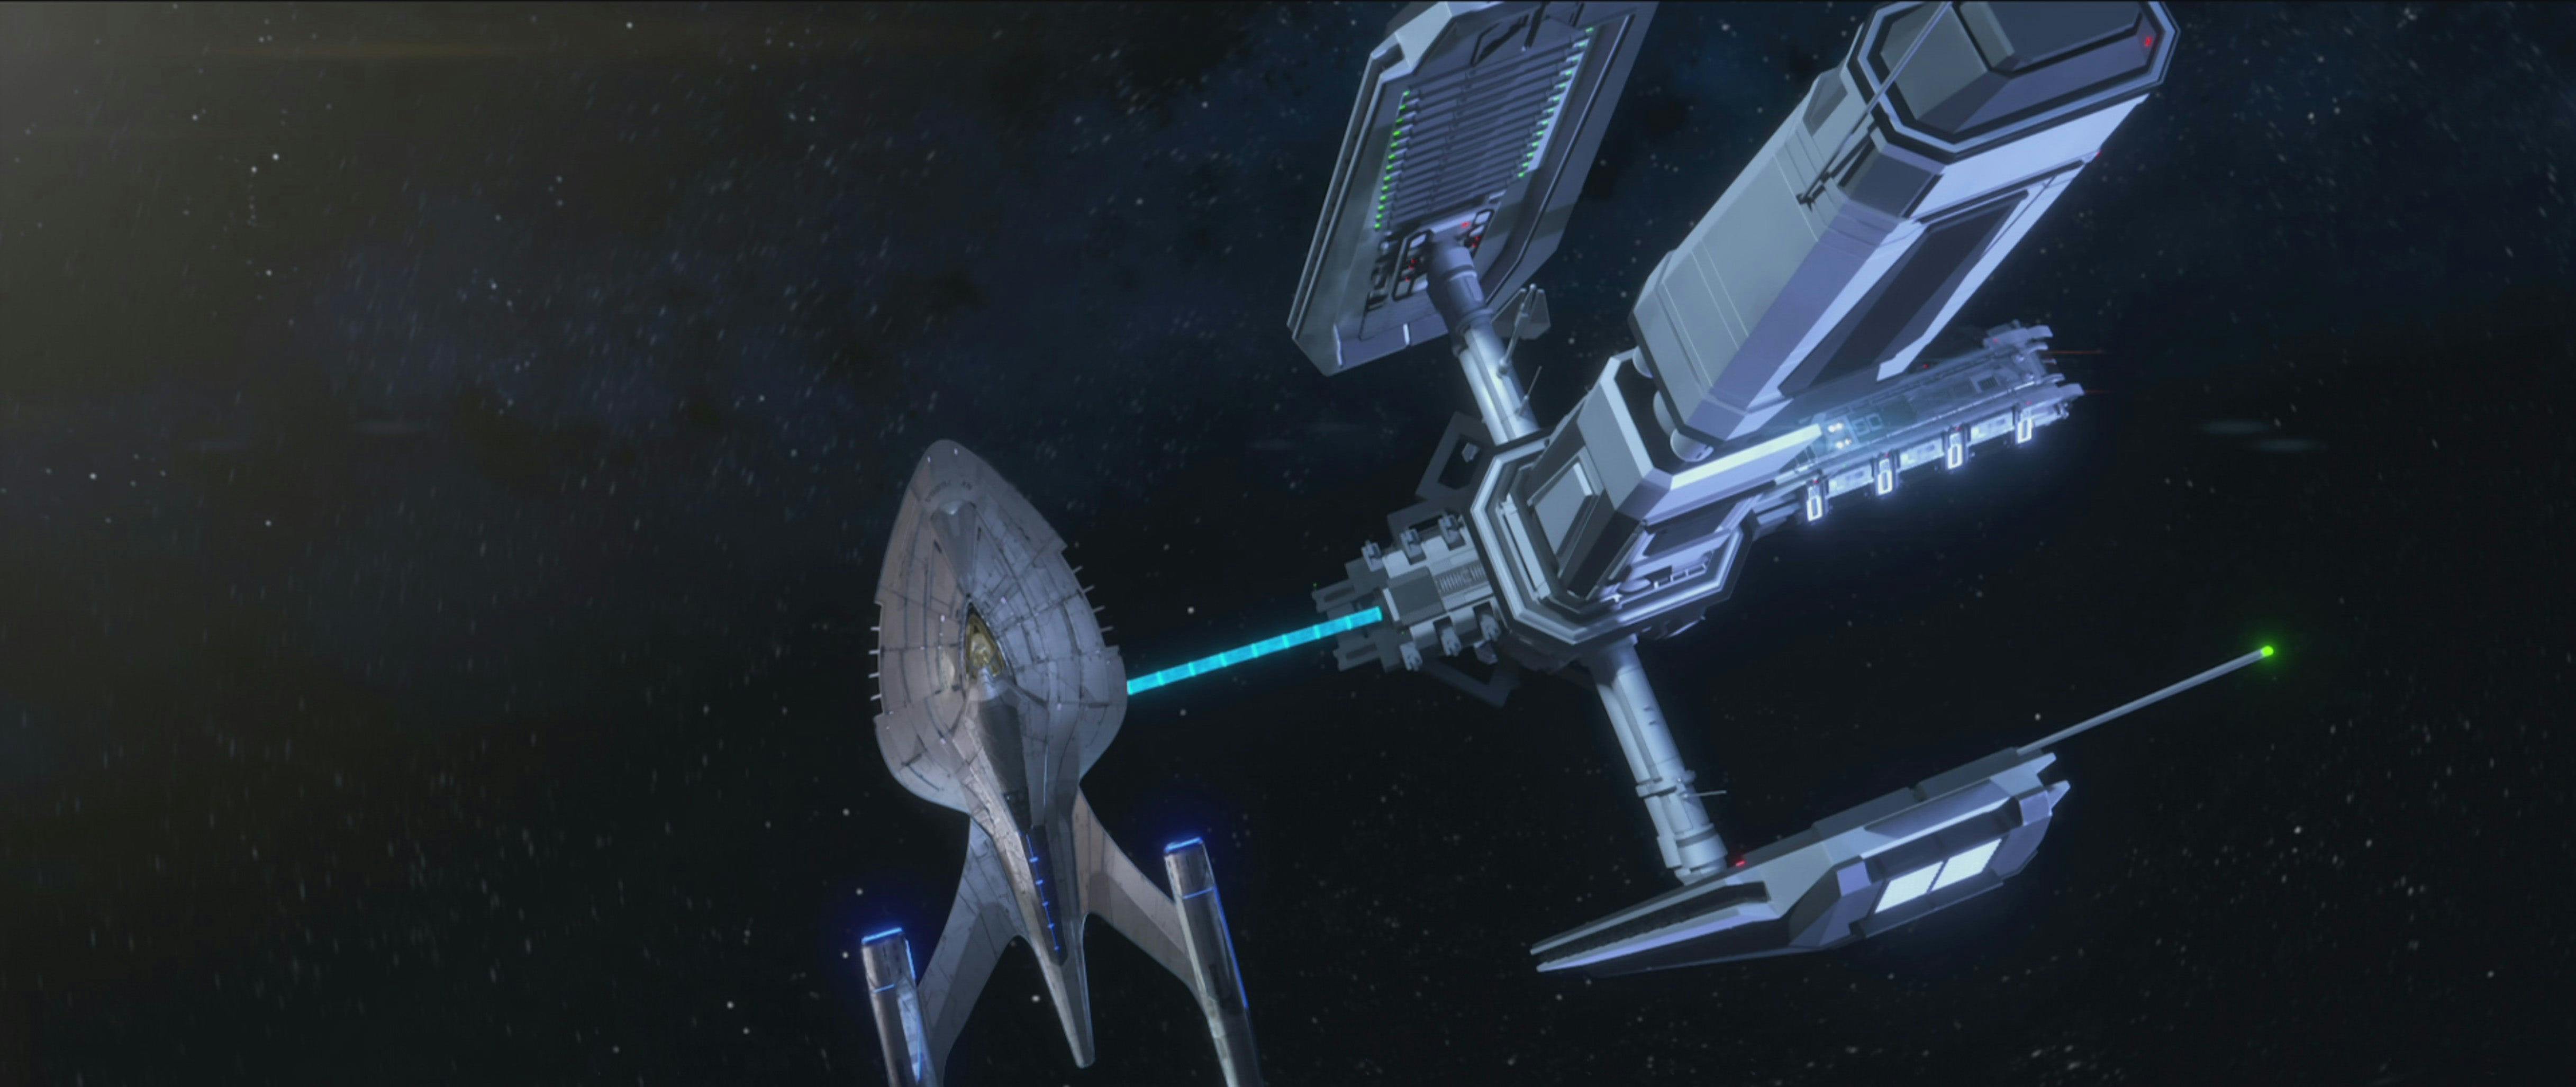 The U.S.S. Protostar docked at a Federation relay station in Star Trek: Prodigy